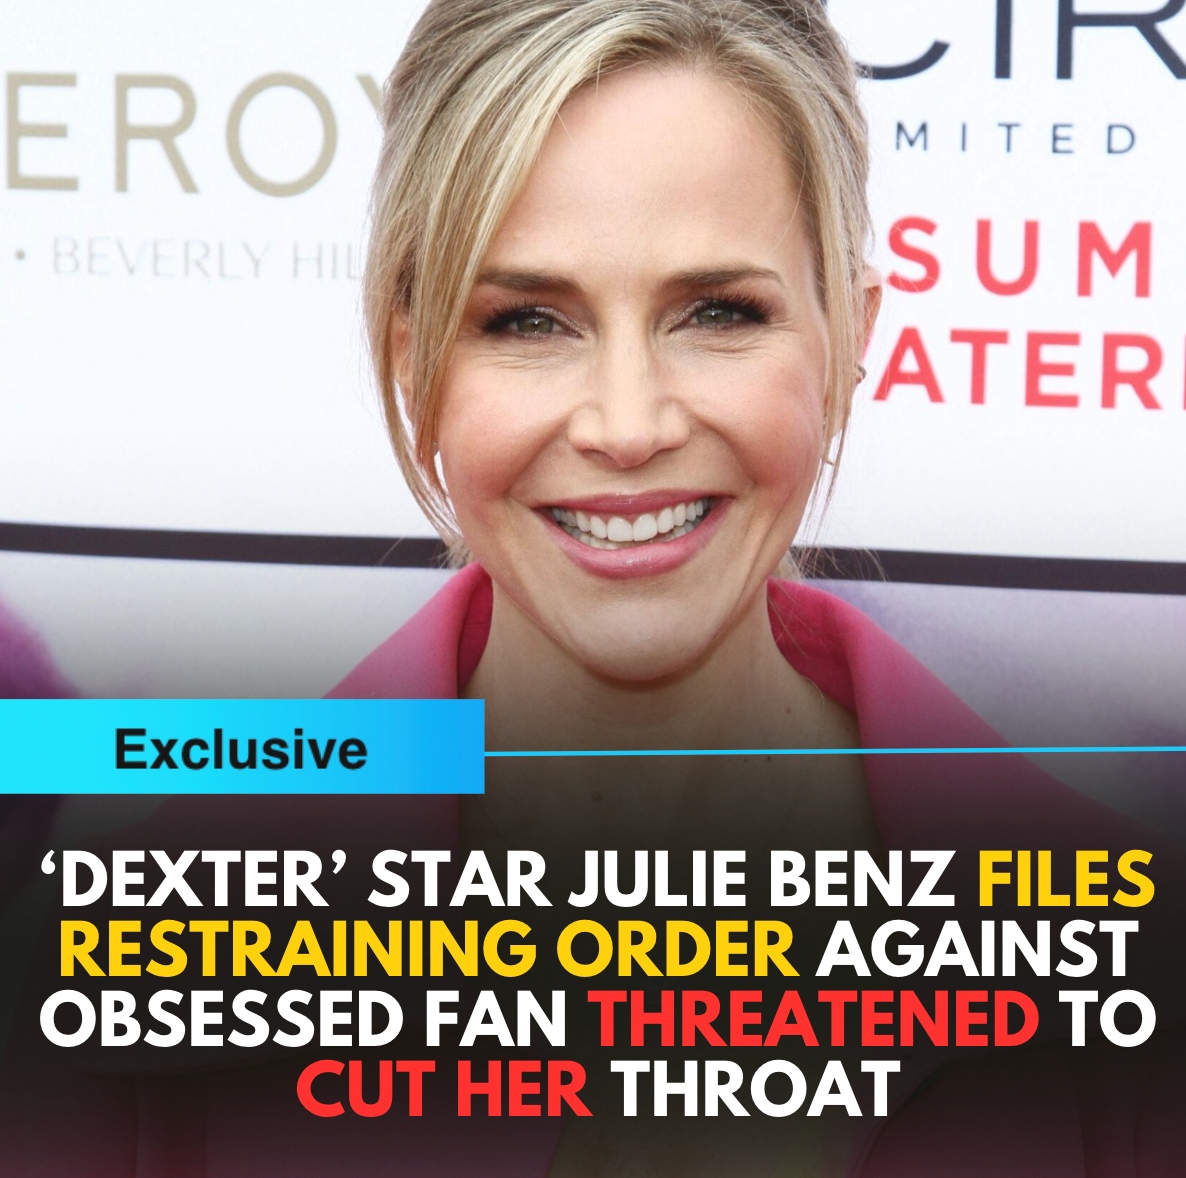 Julie Benz, best known for her roles in “Dexter” and “Saw V”, has filed a restraining order after an obsessed fan threatened to cut her throat with a knife. theblast.com/552180/dexter-…